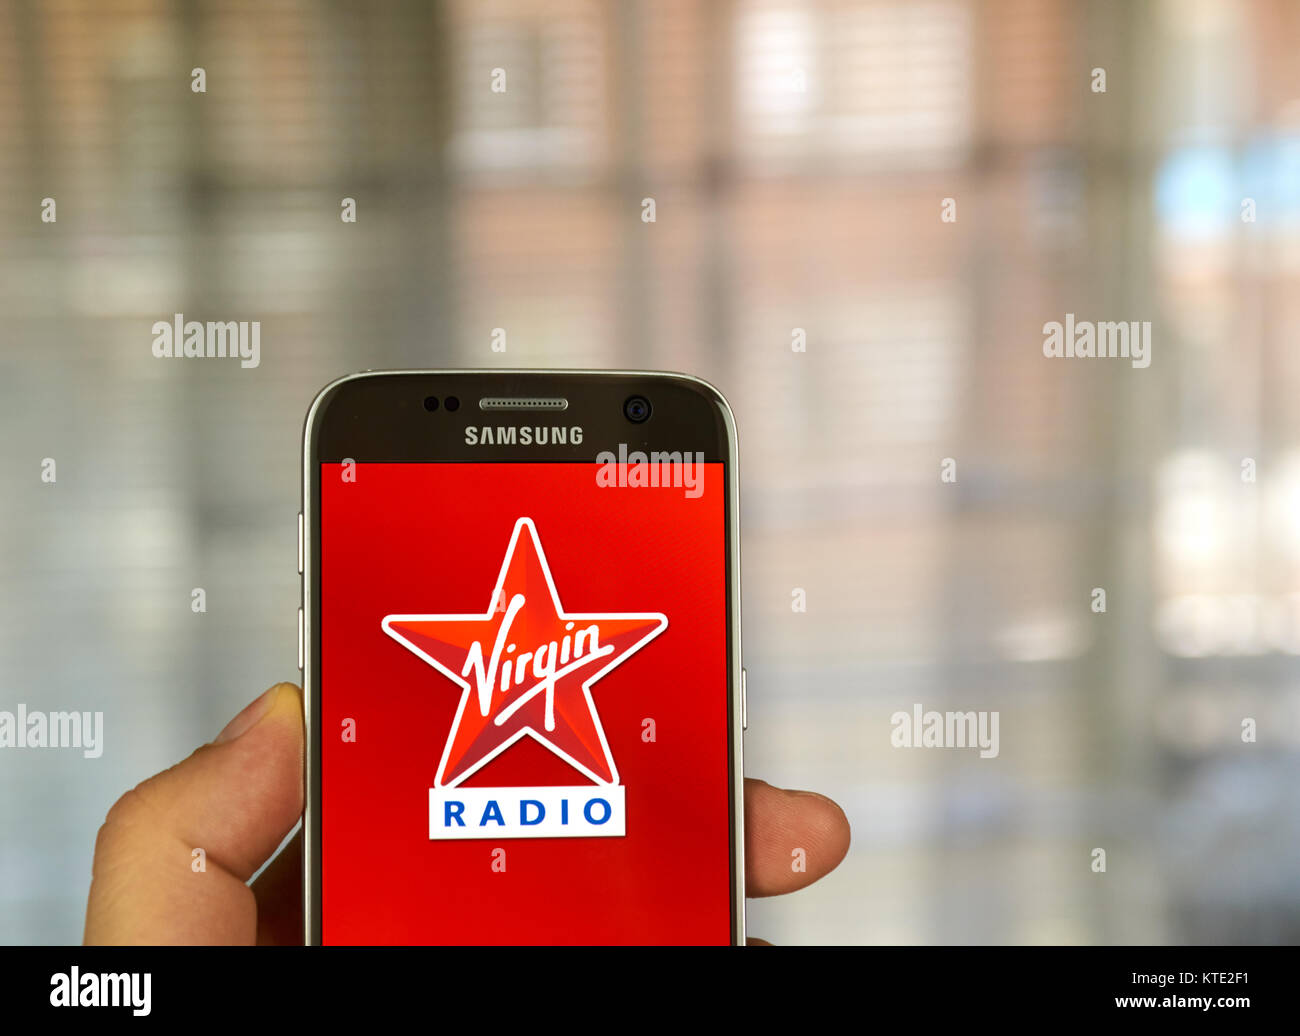 MONTREAL, CANADA - JUNE 24, 2016 : Virgin Radio android application on Samsung S7 screen. Virgin Radio is a brand owned by the Virgin Group. Stock Photo